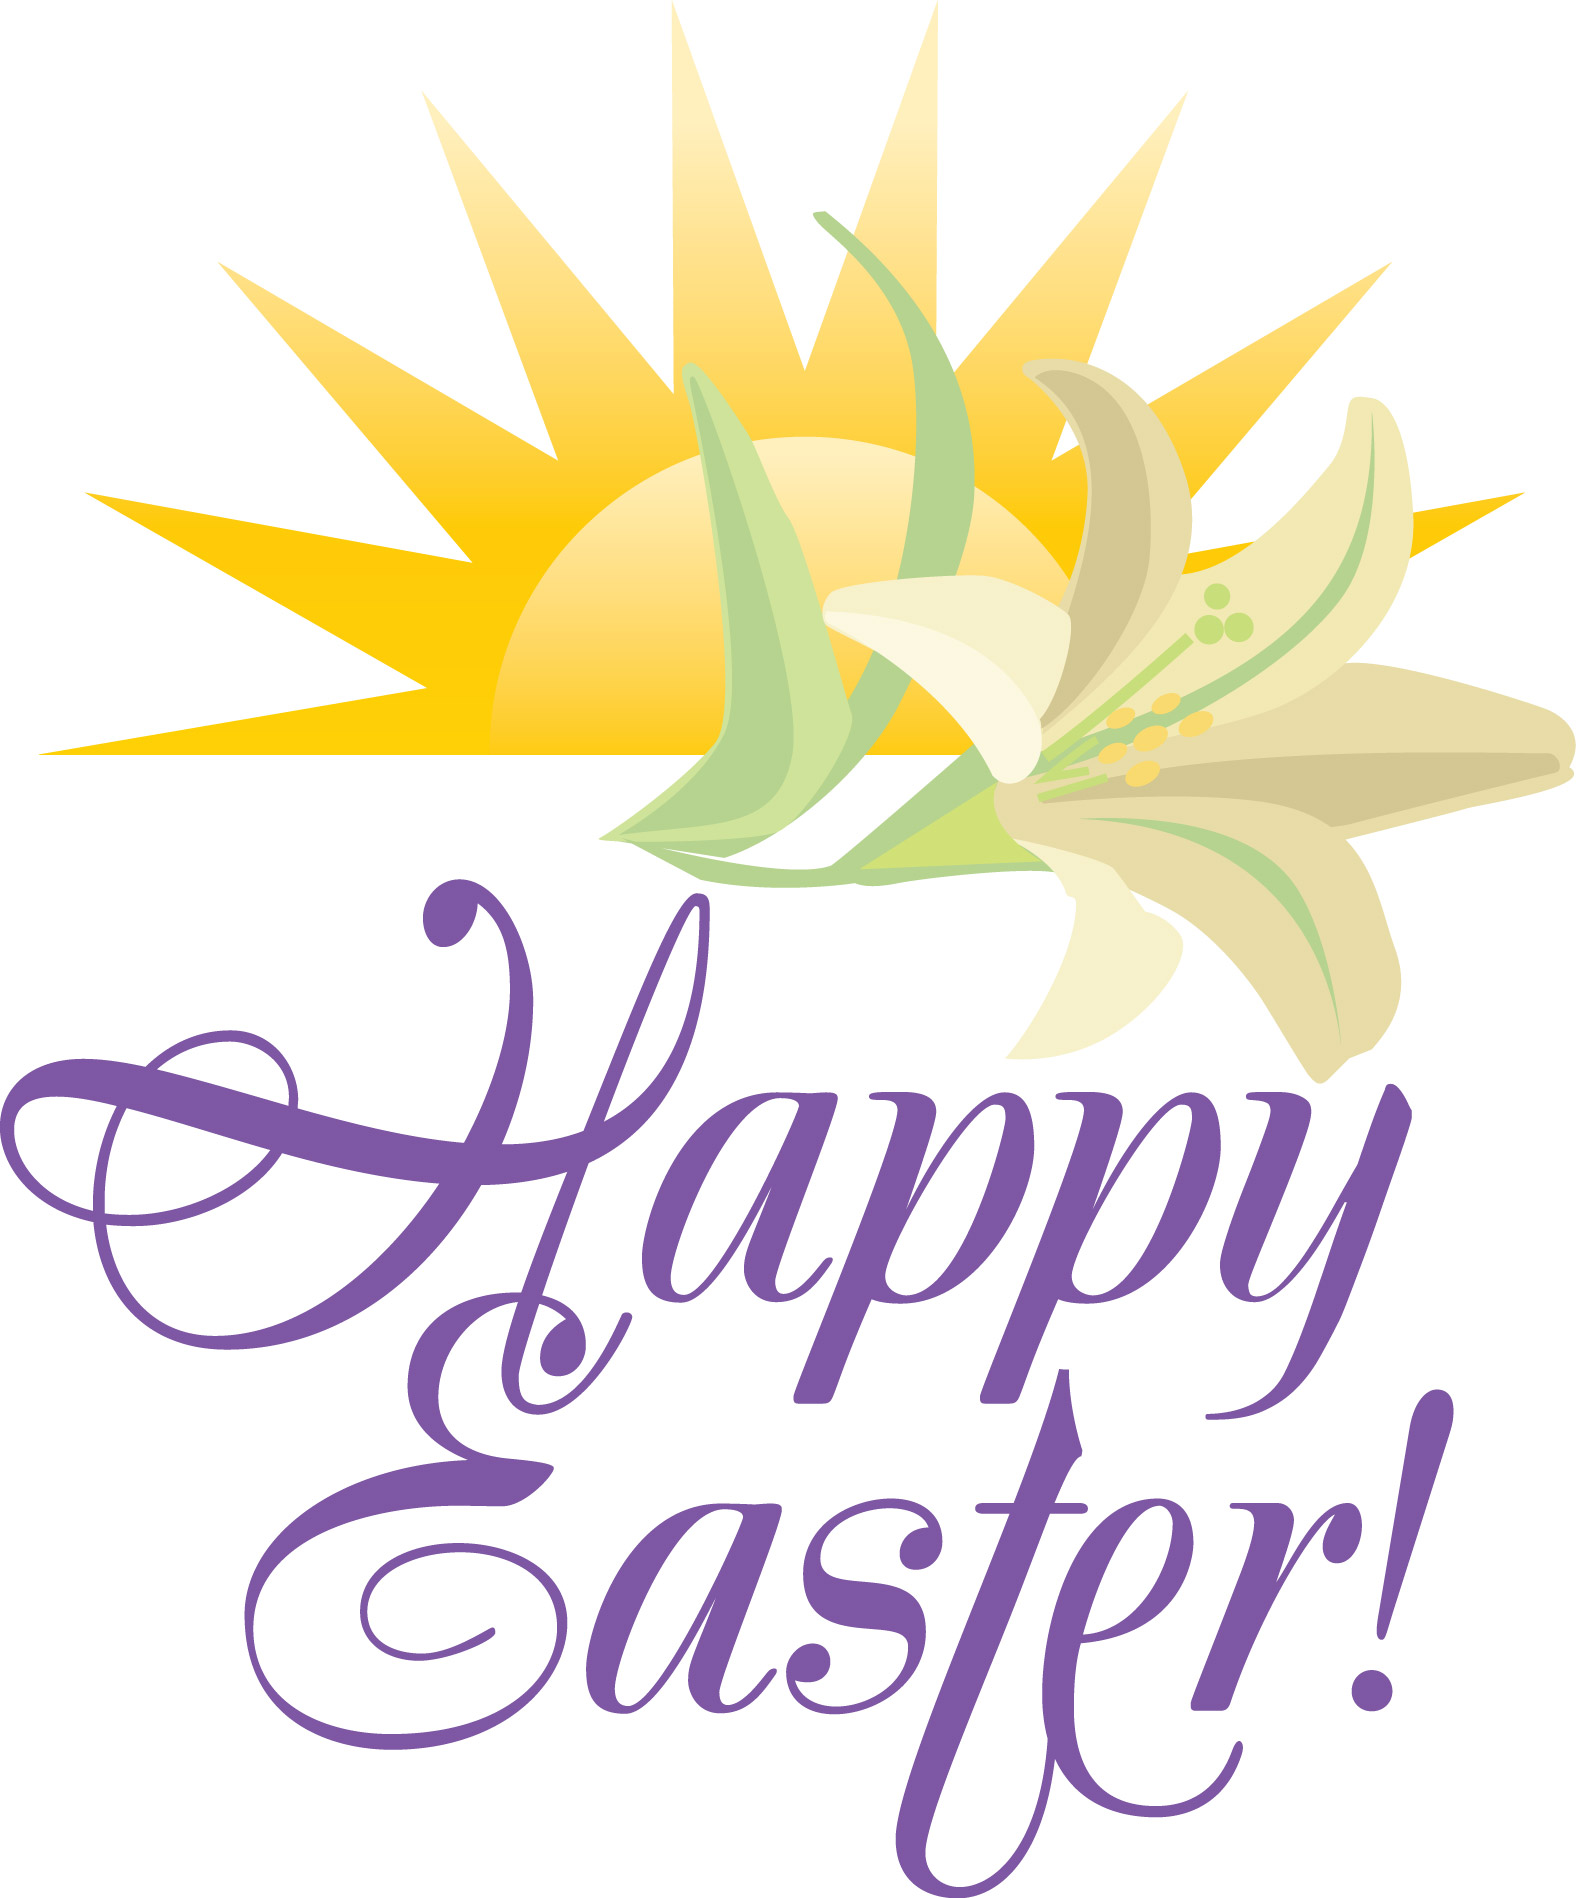 free easter clip art for churches - photo #21